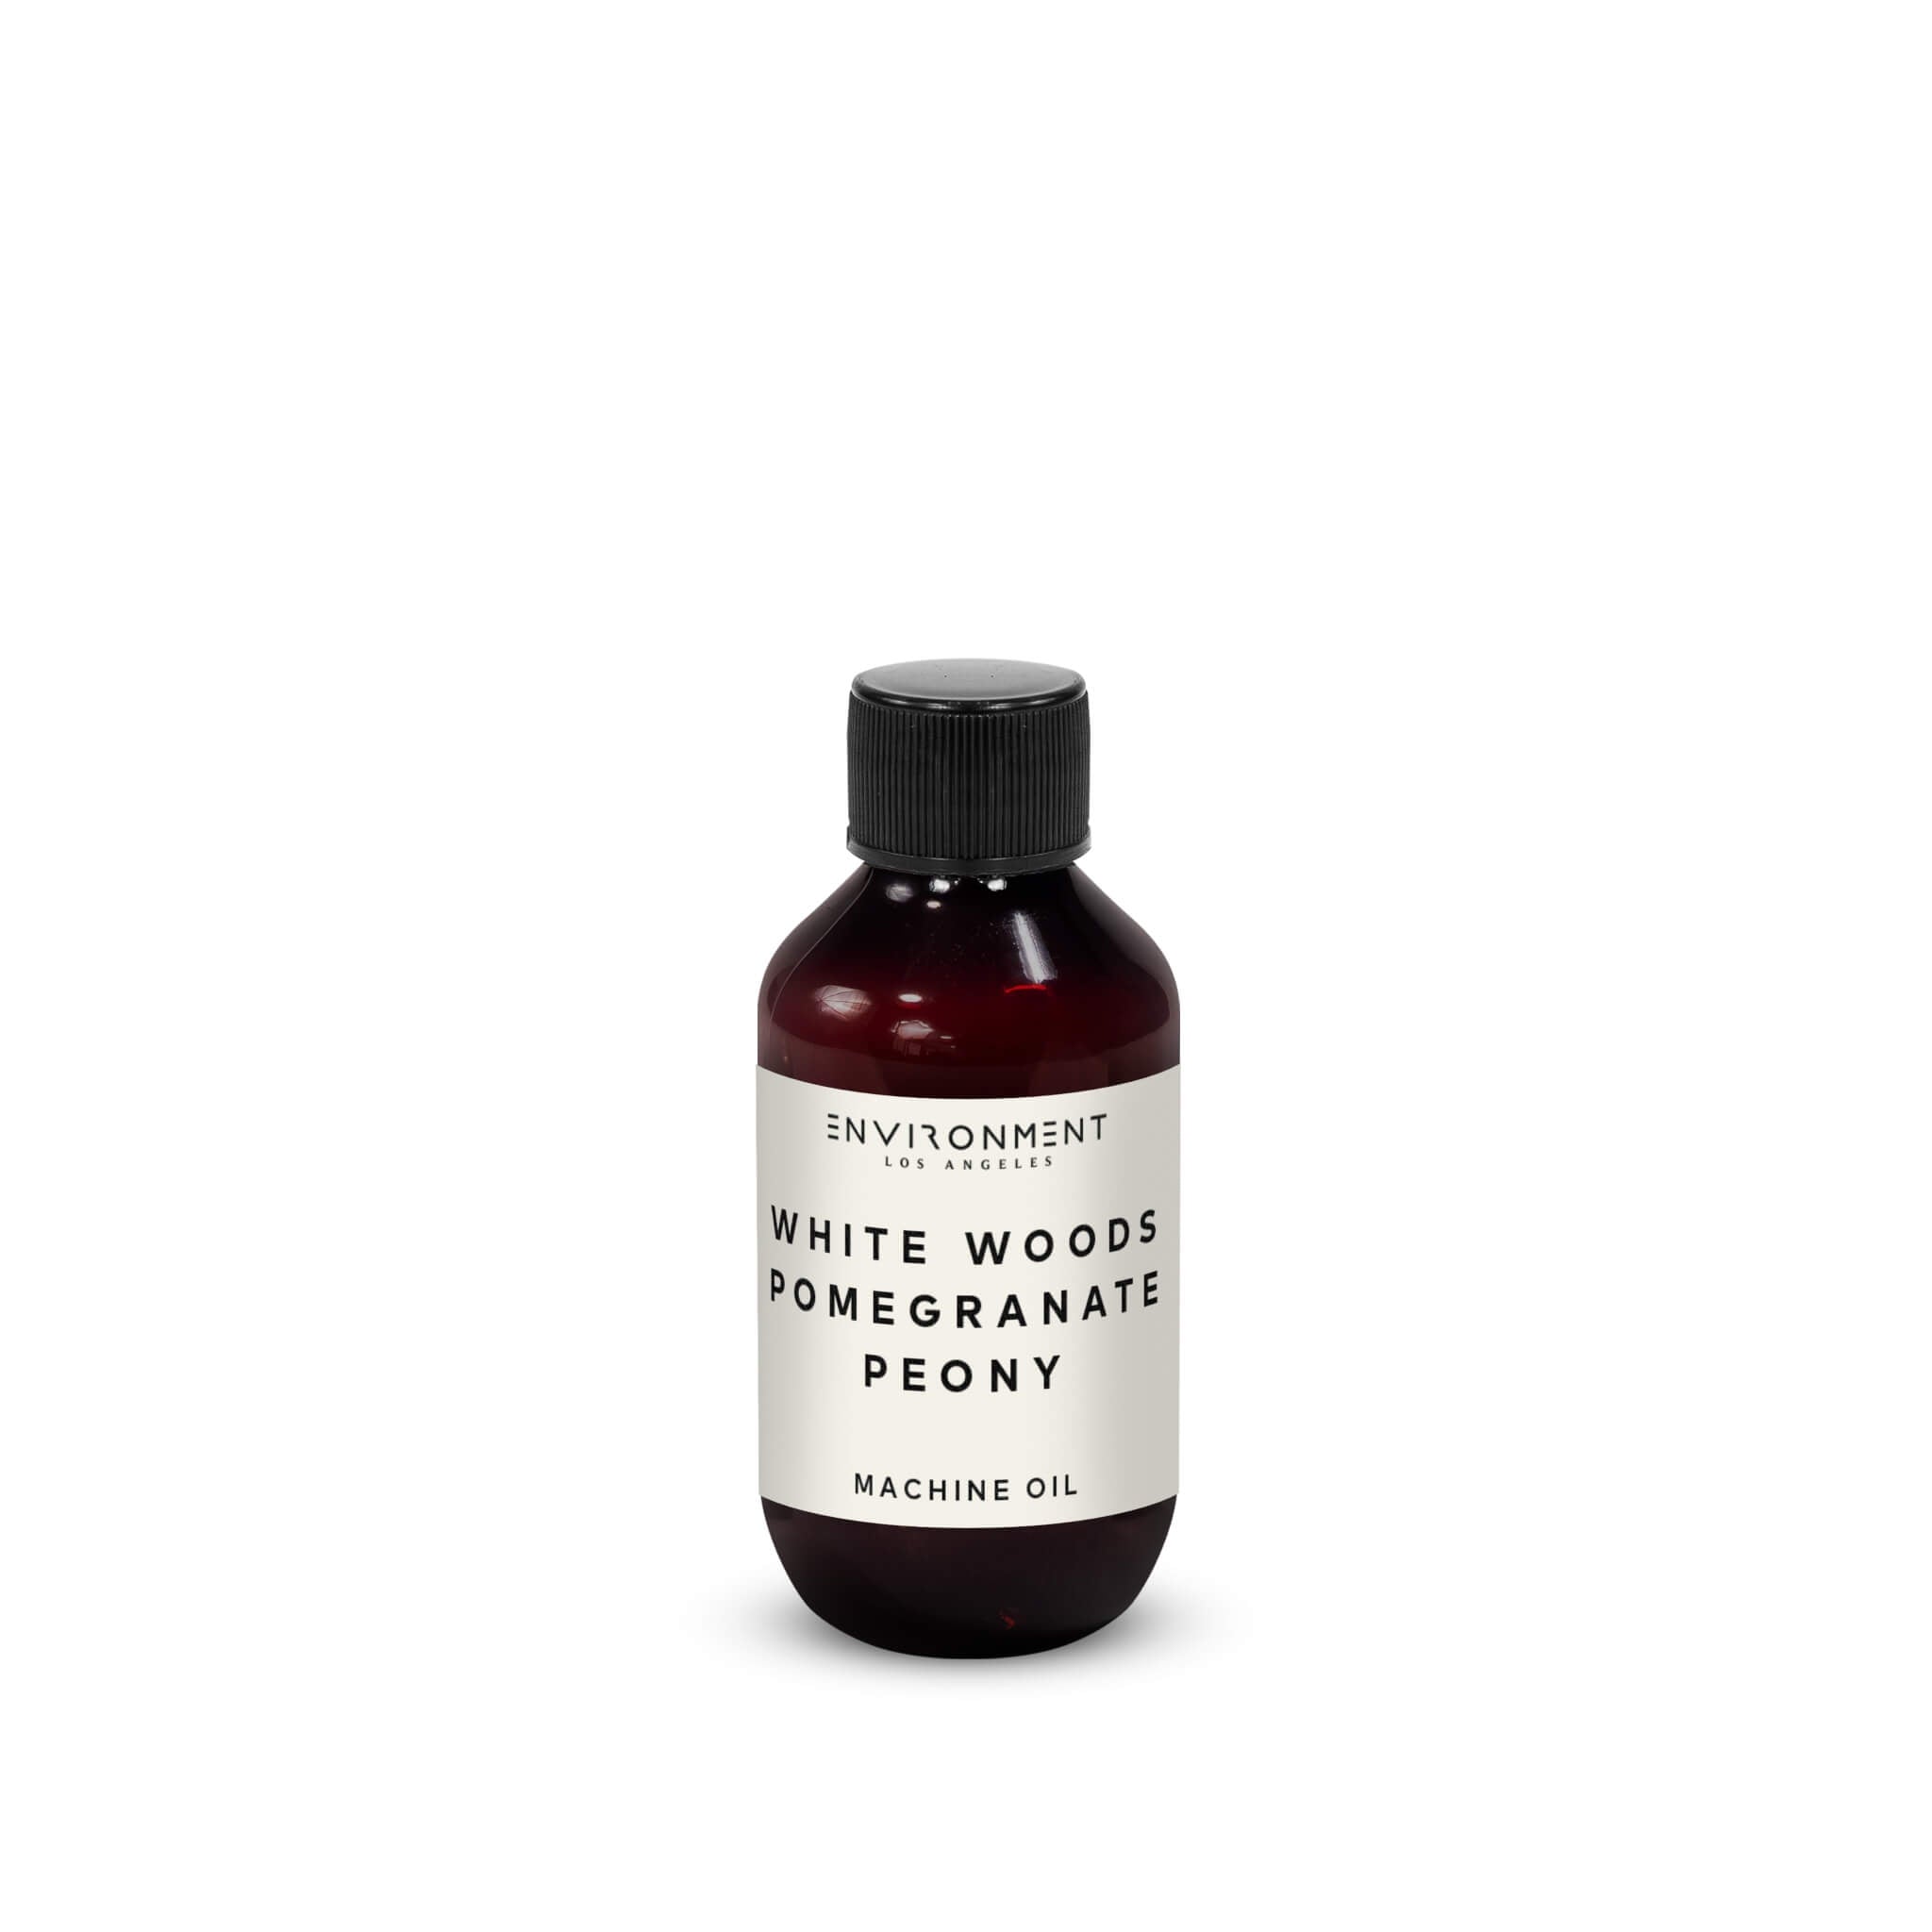 2oz White Woods | Pomegranate | Peony Machine Diffusing Oil (Inspired by The Aria Hotel®)